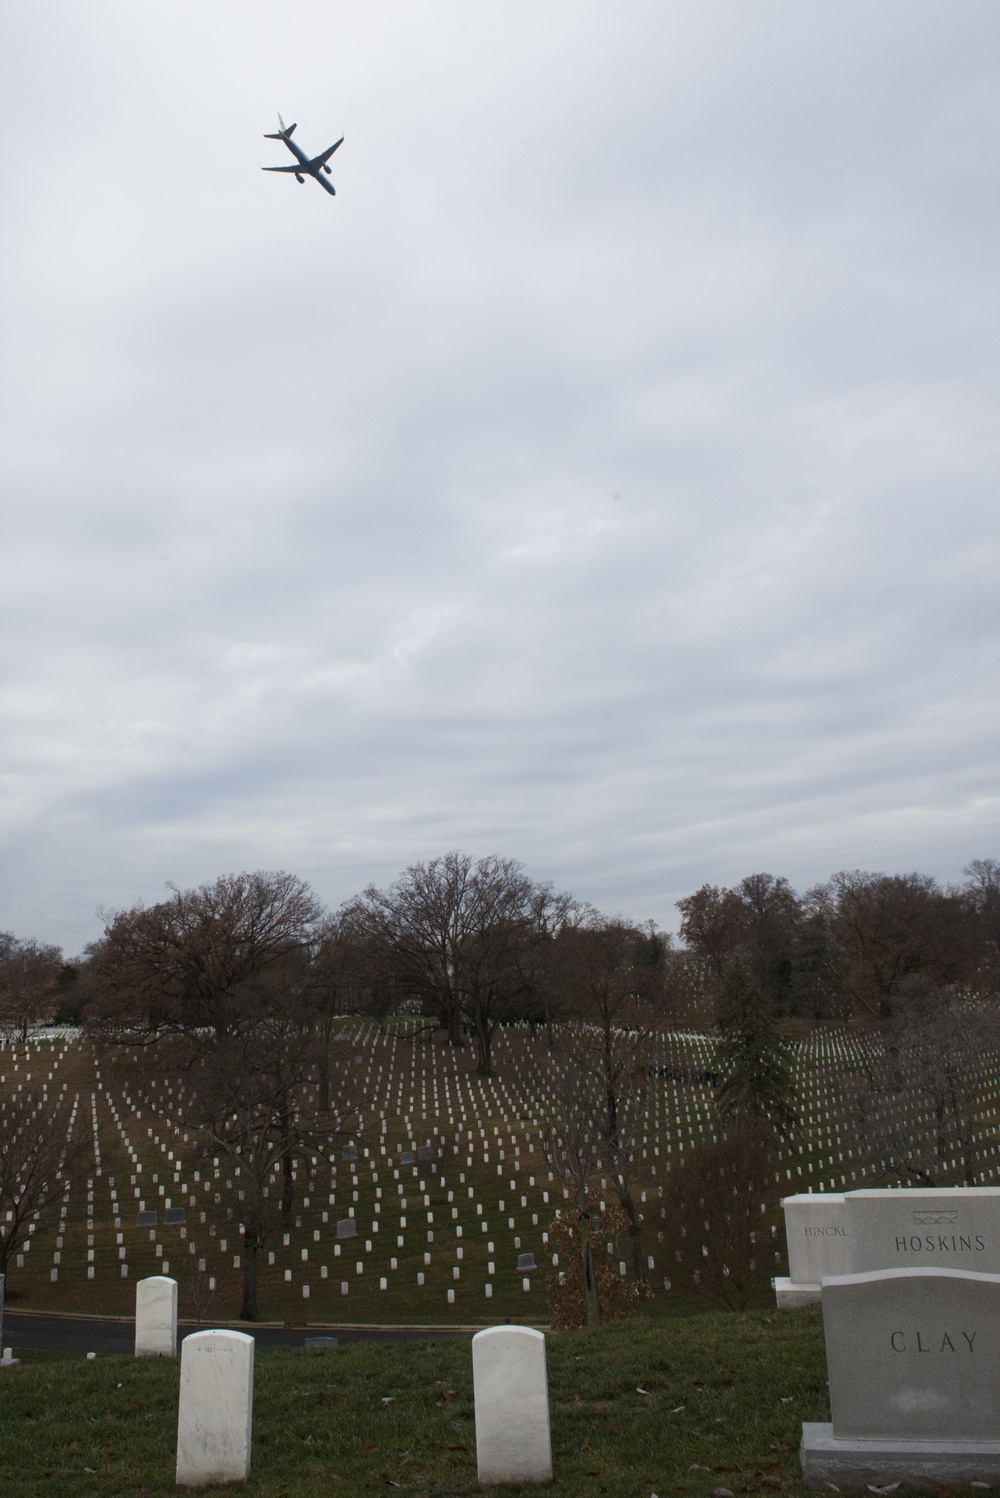 Air Force Two conducts a fly-over above Arlington National Cemetery